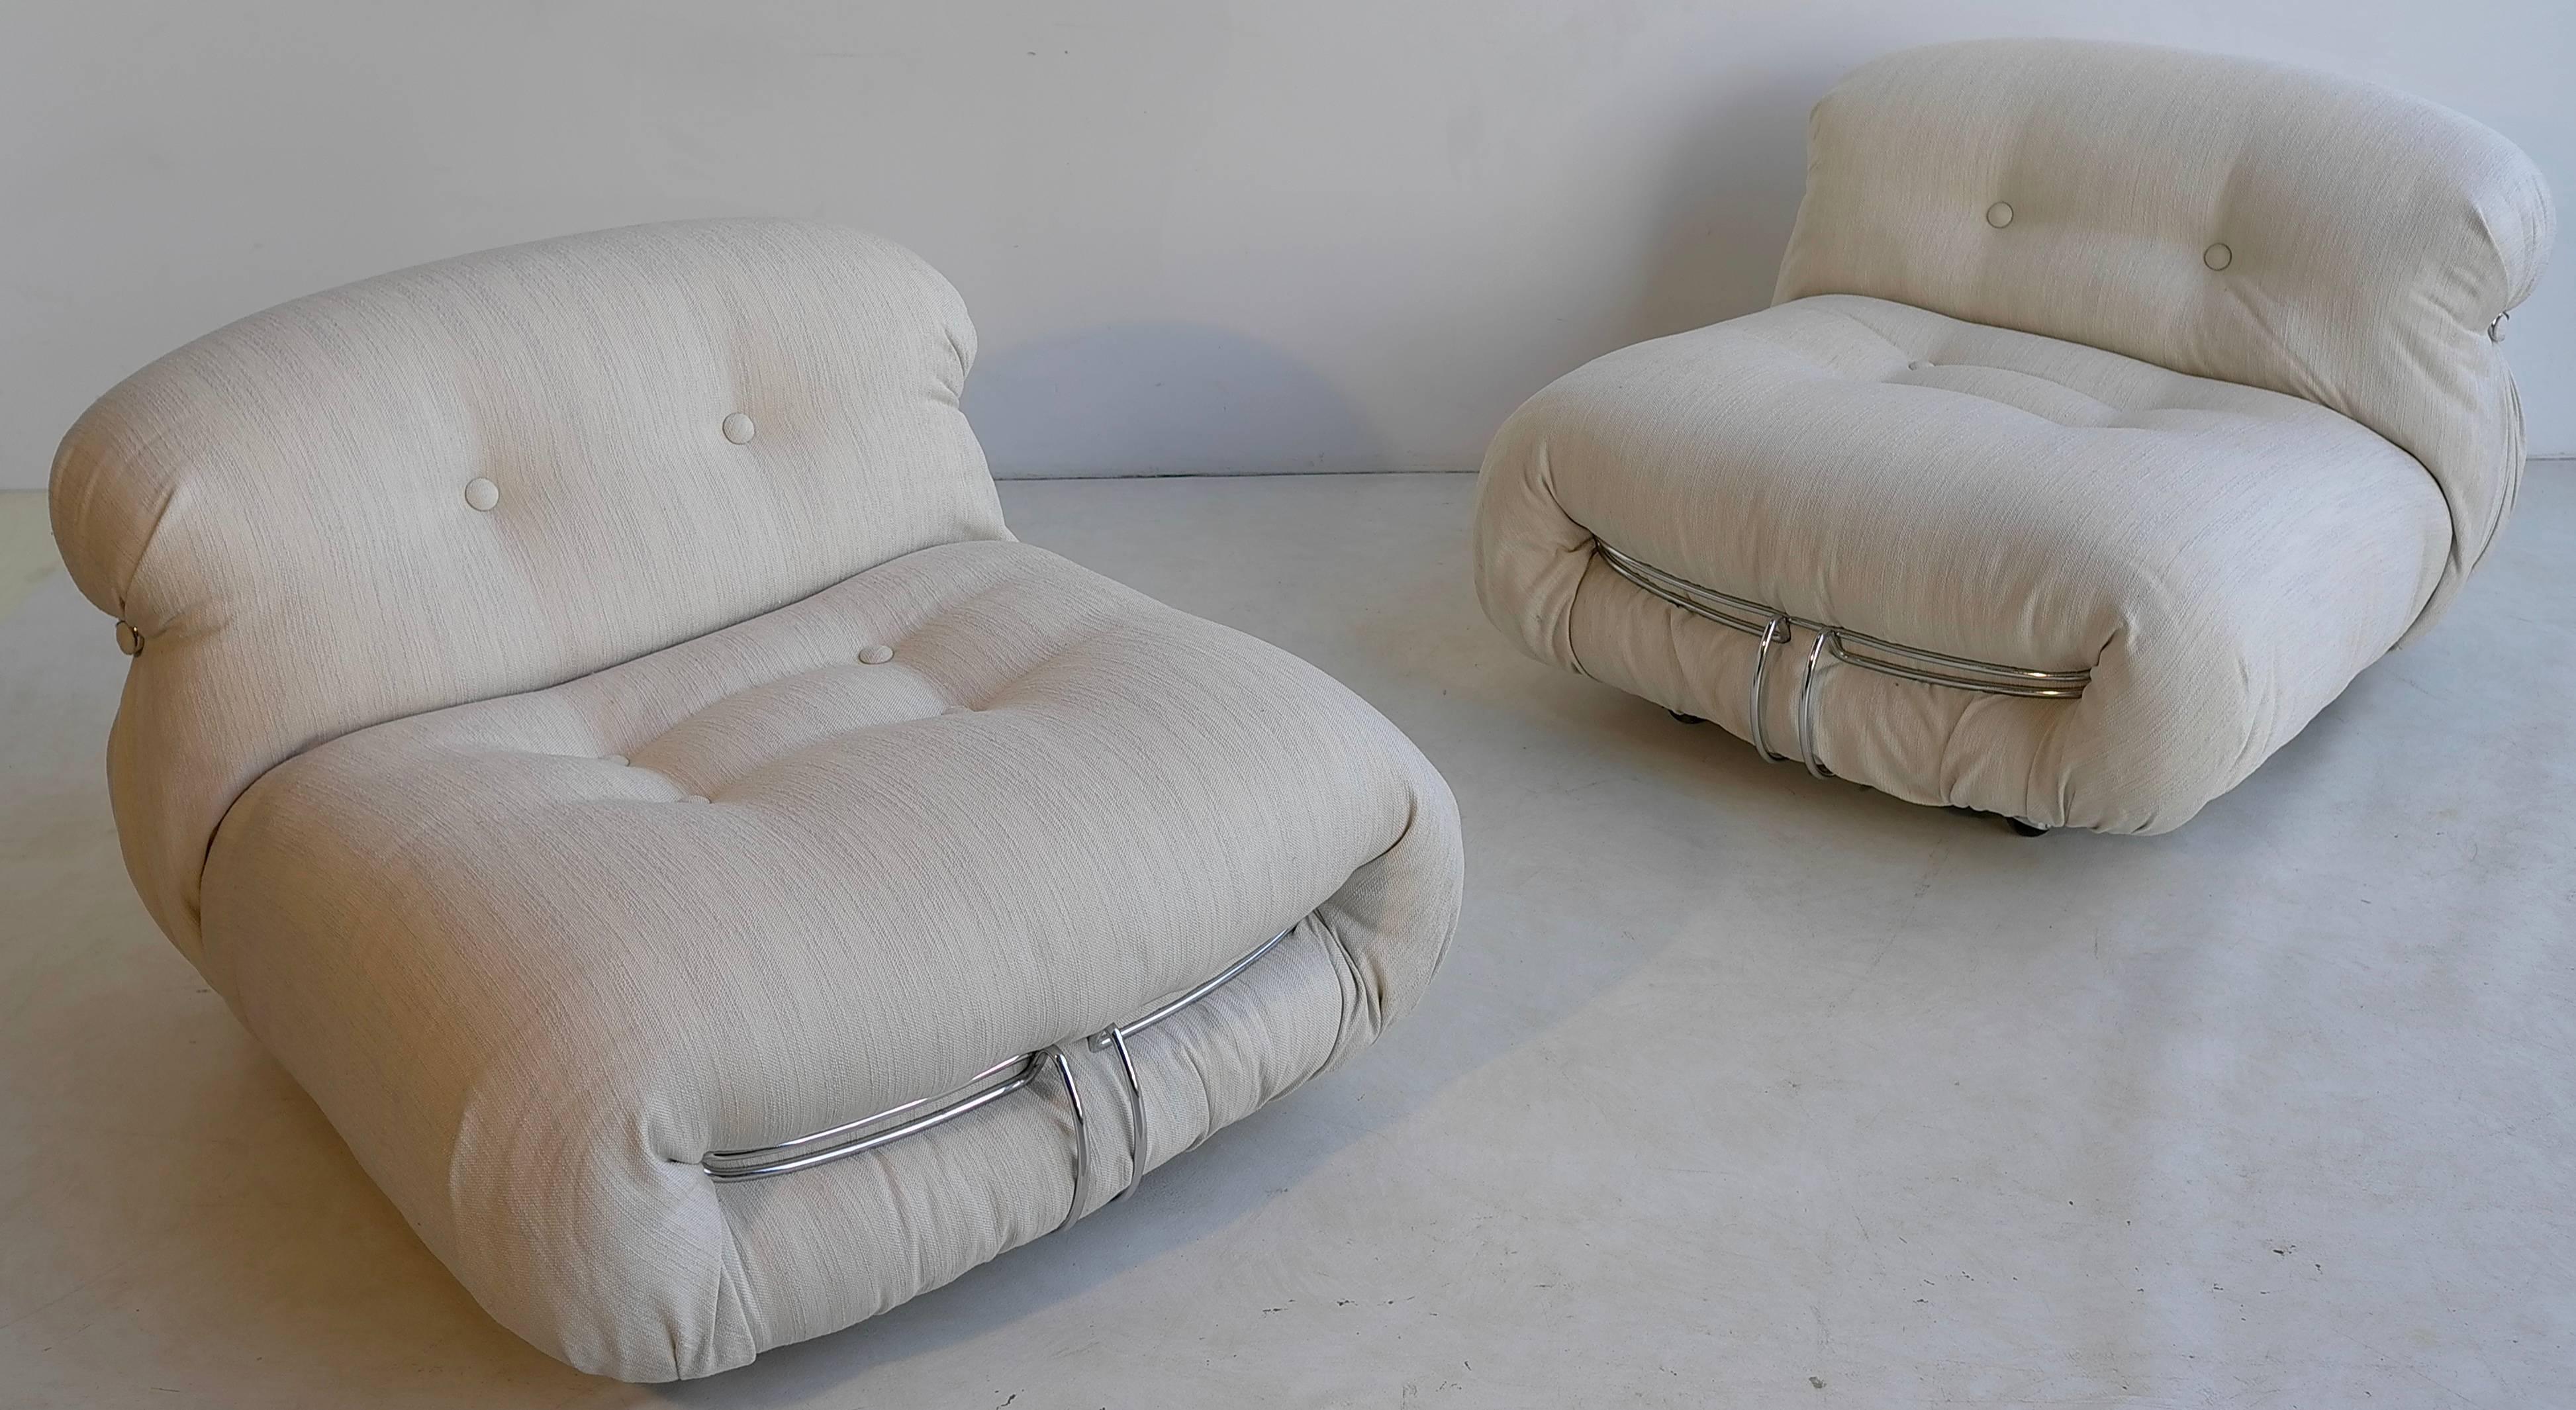 Pair of Afra & Tobia Scarpa 'Soriana' lounge chairs in off white, Italy, 1970s. Lovely iconic pair newly upholstered in off white fabric. Matching long-seat including ottoman also available.

Afra (1937-2011) & Tobia (1935-) Scarpa both studied on